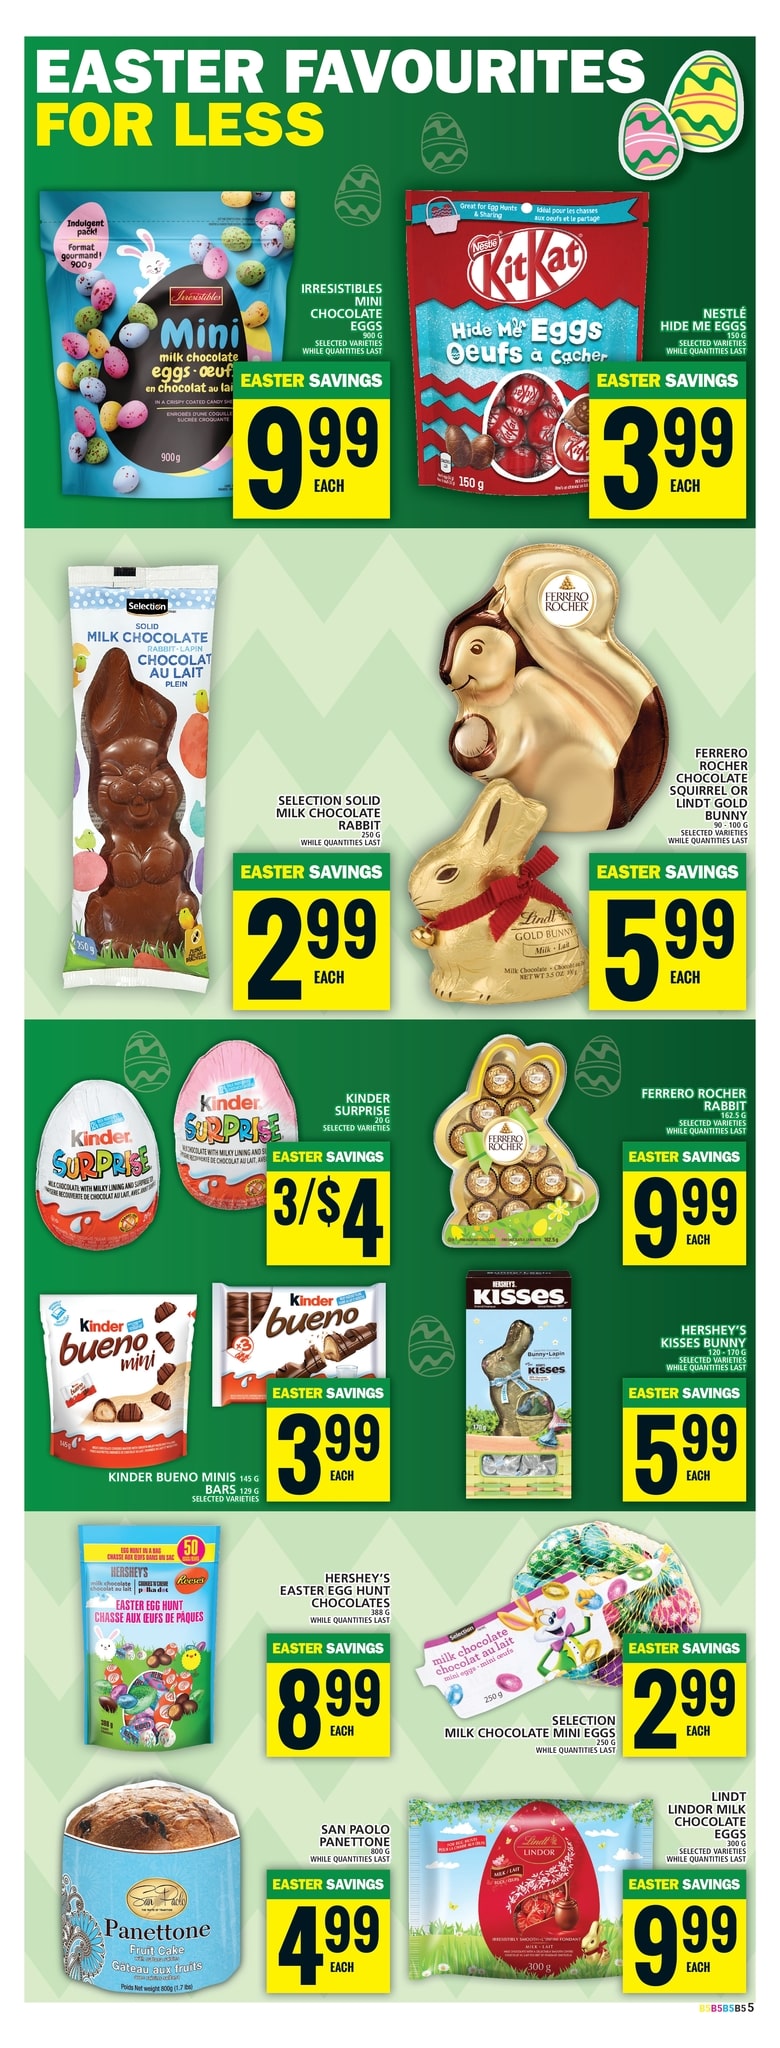 Food Basics - Weekly Flyer Specials - Page 5